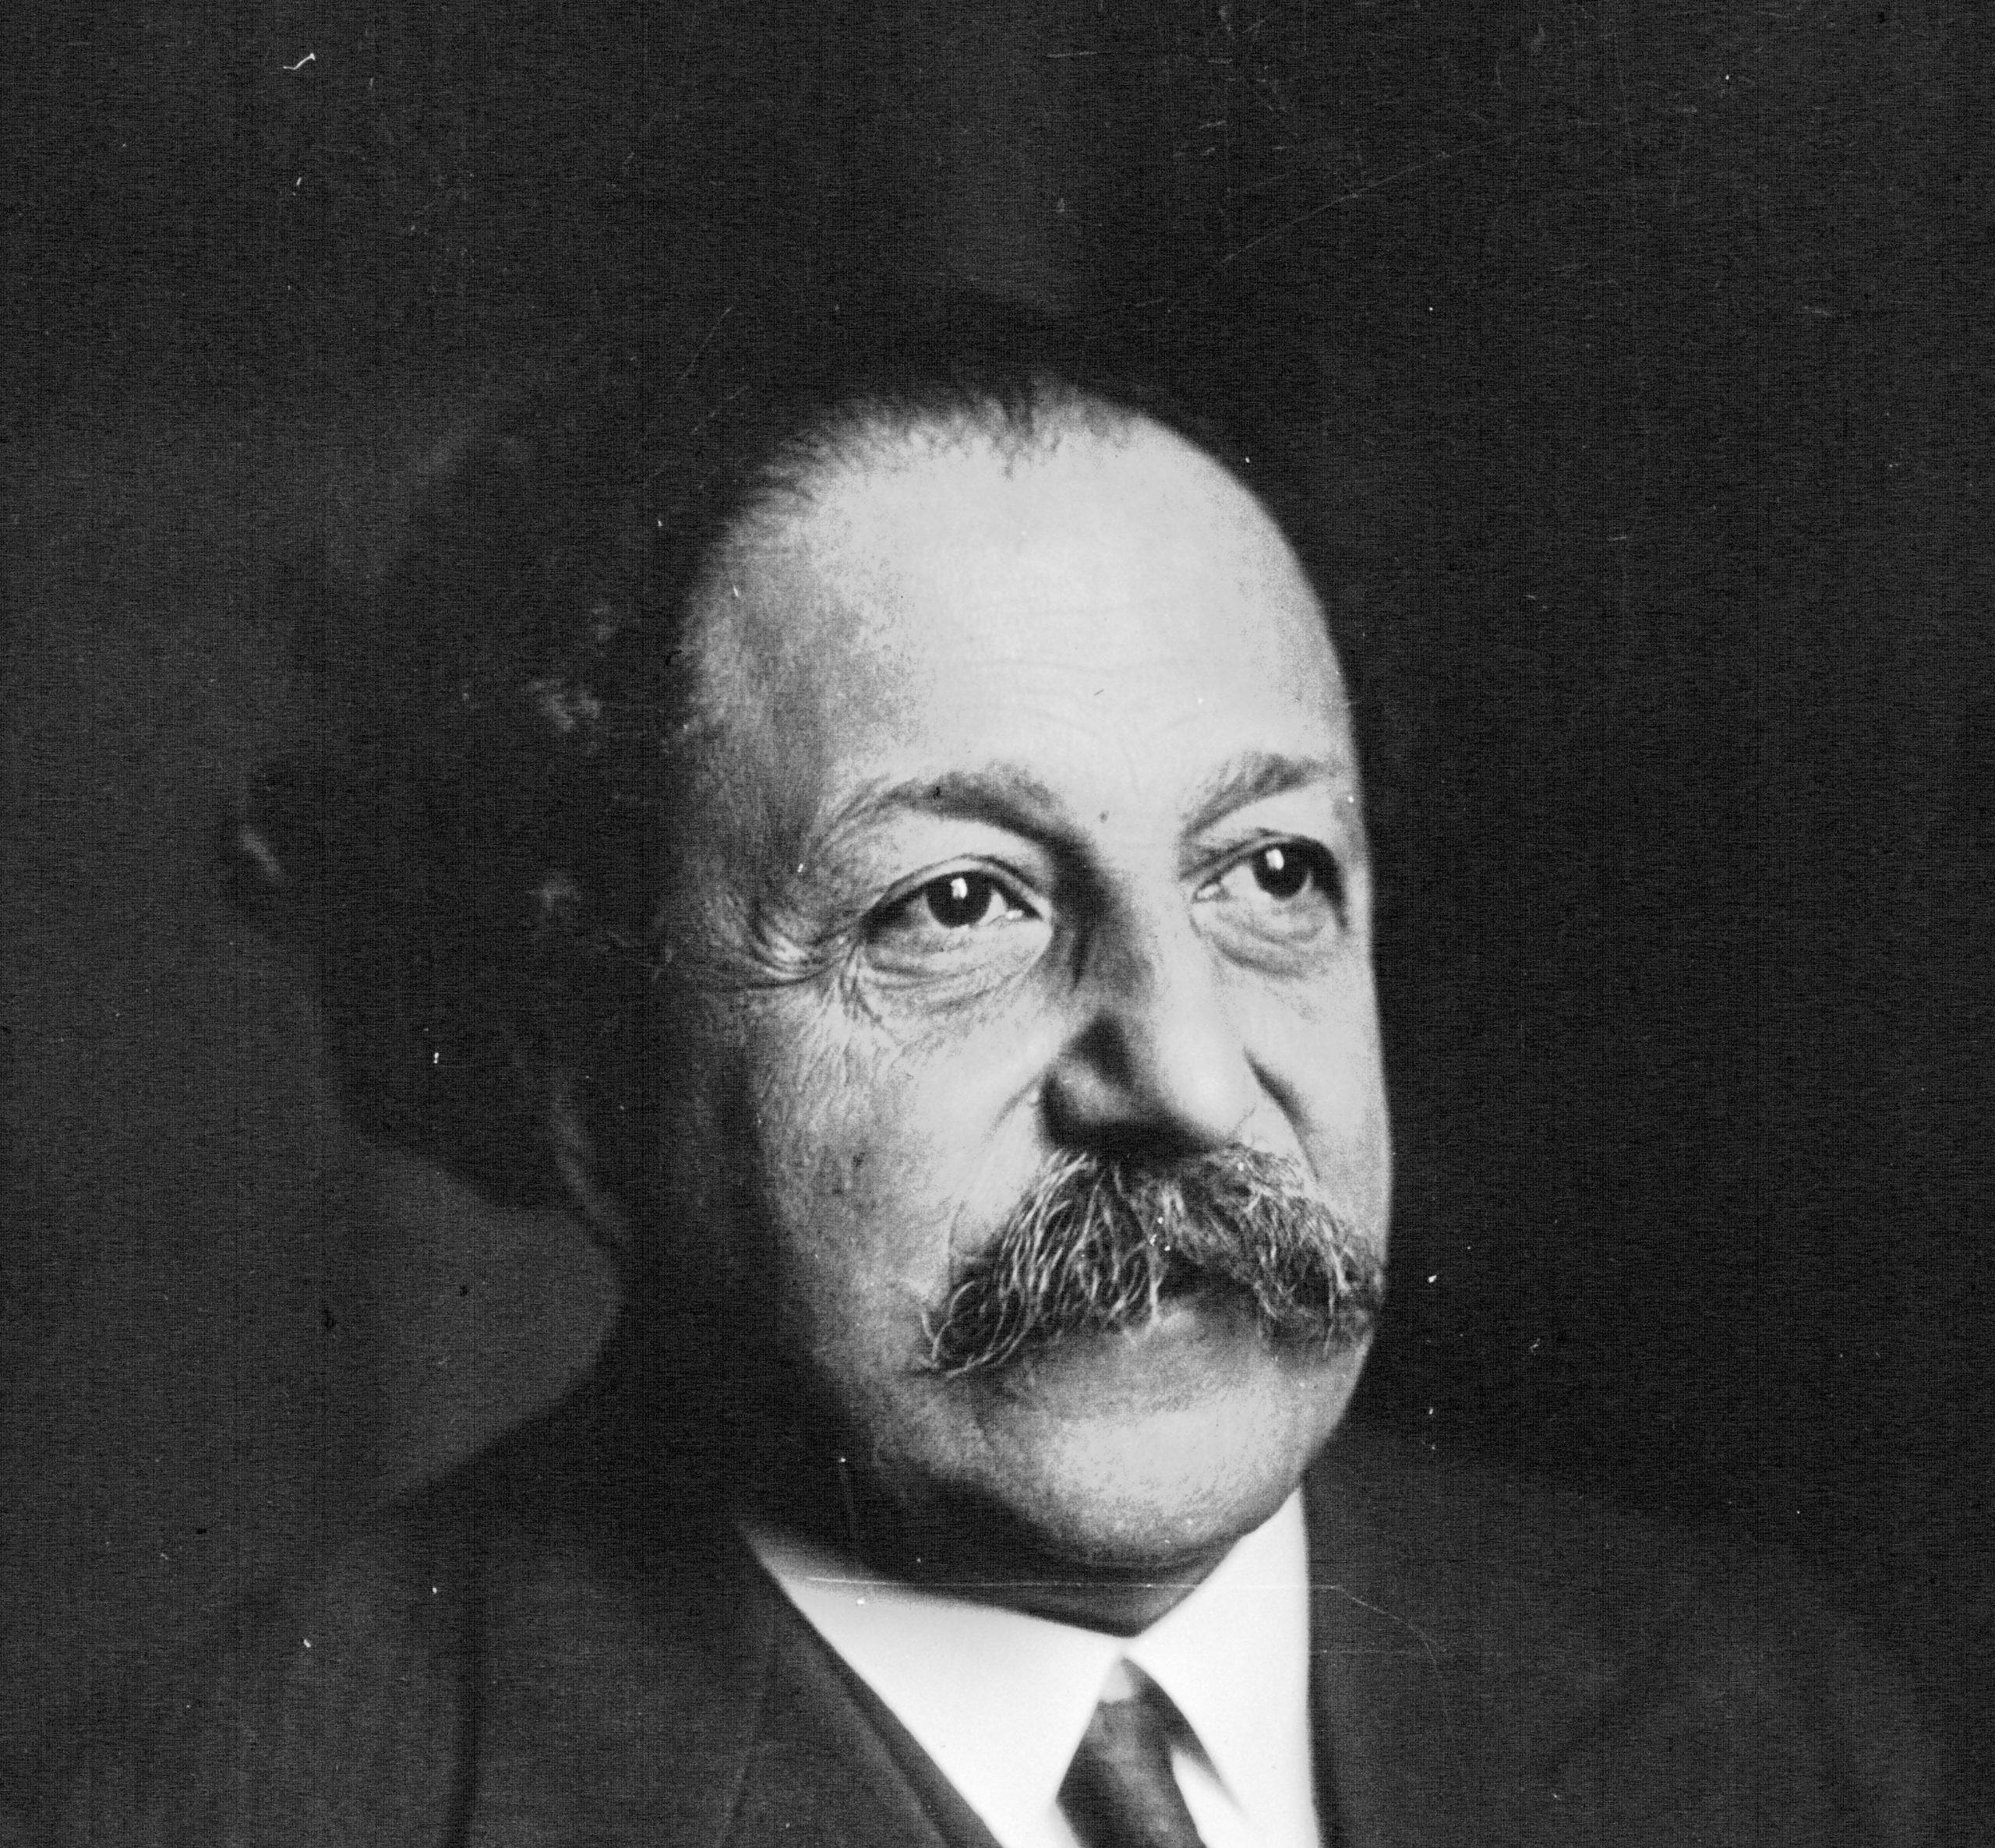 Pierre Monteux and the criterion of success